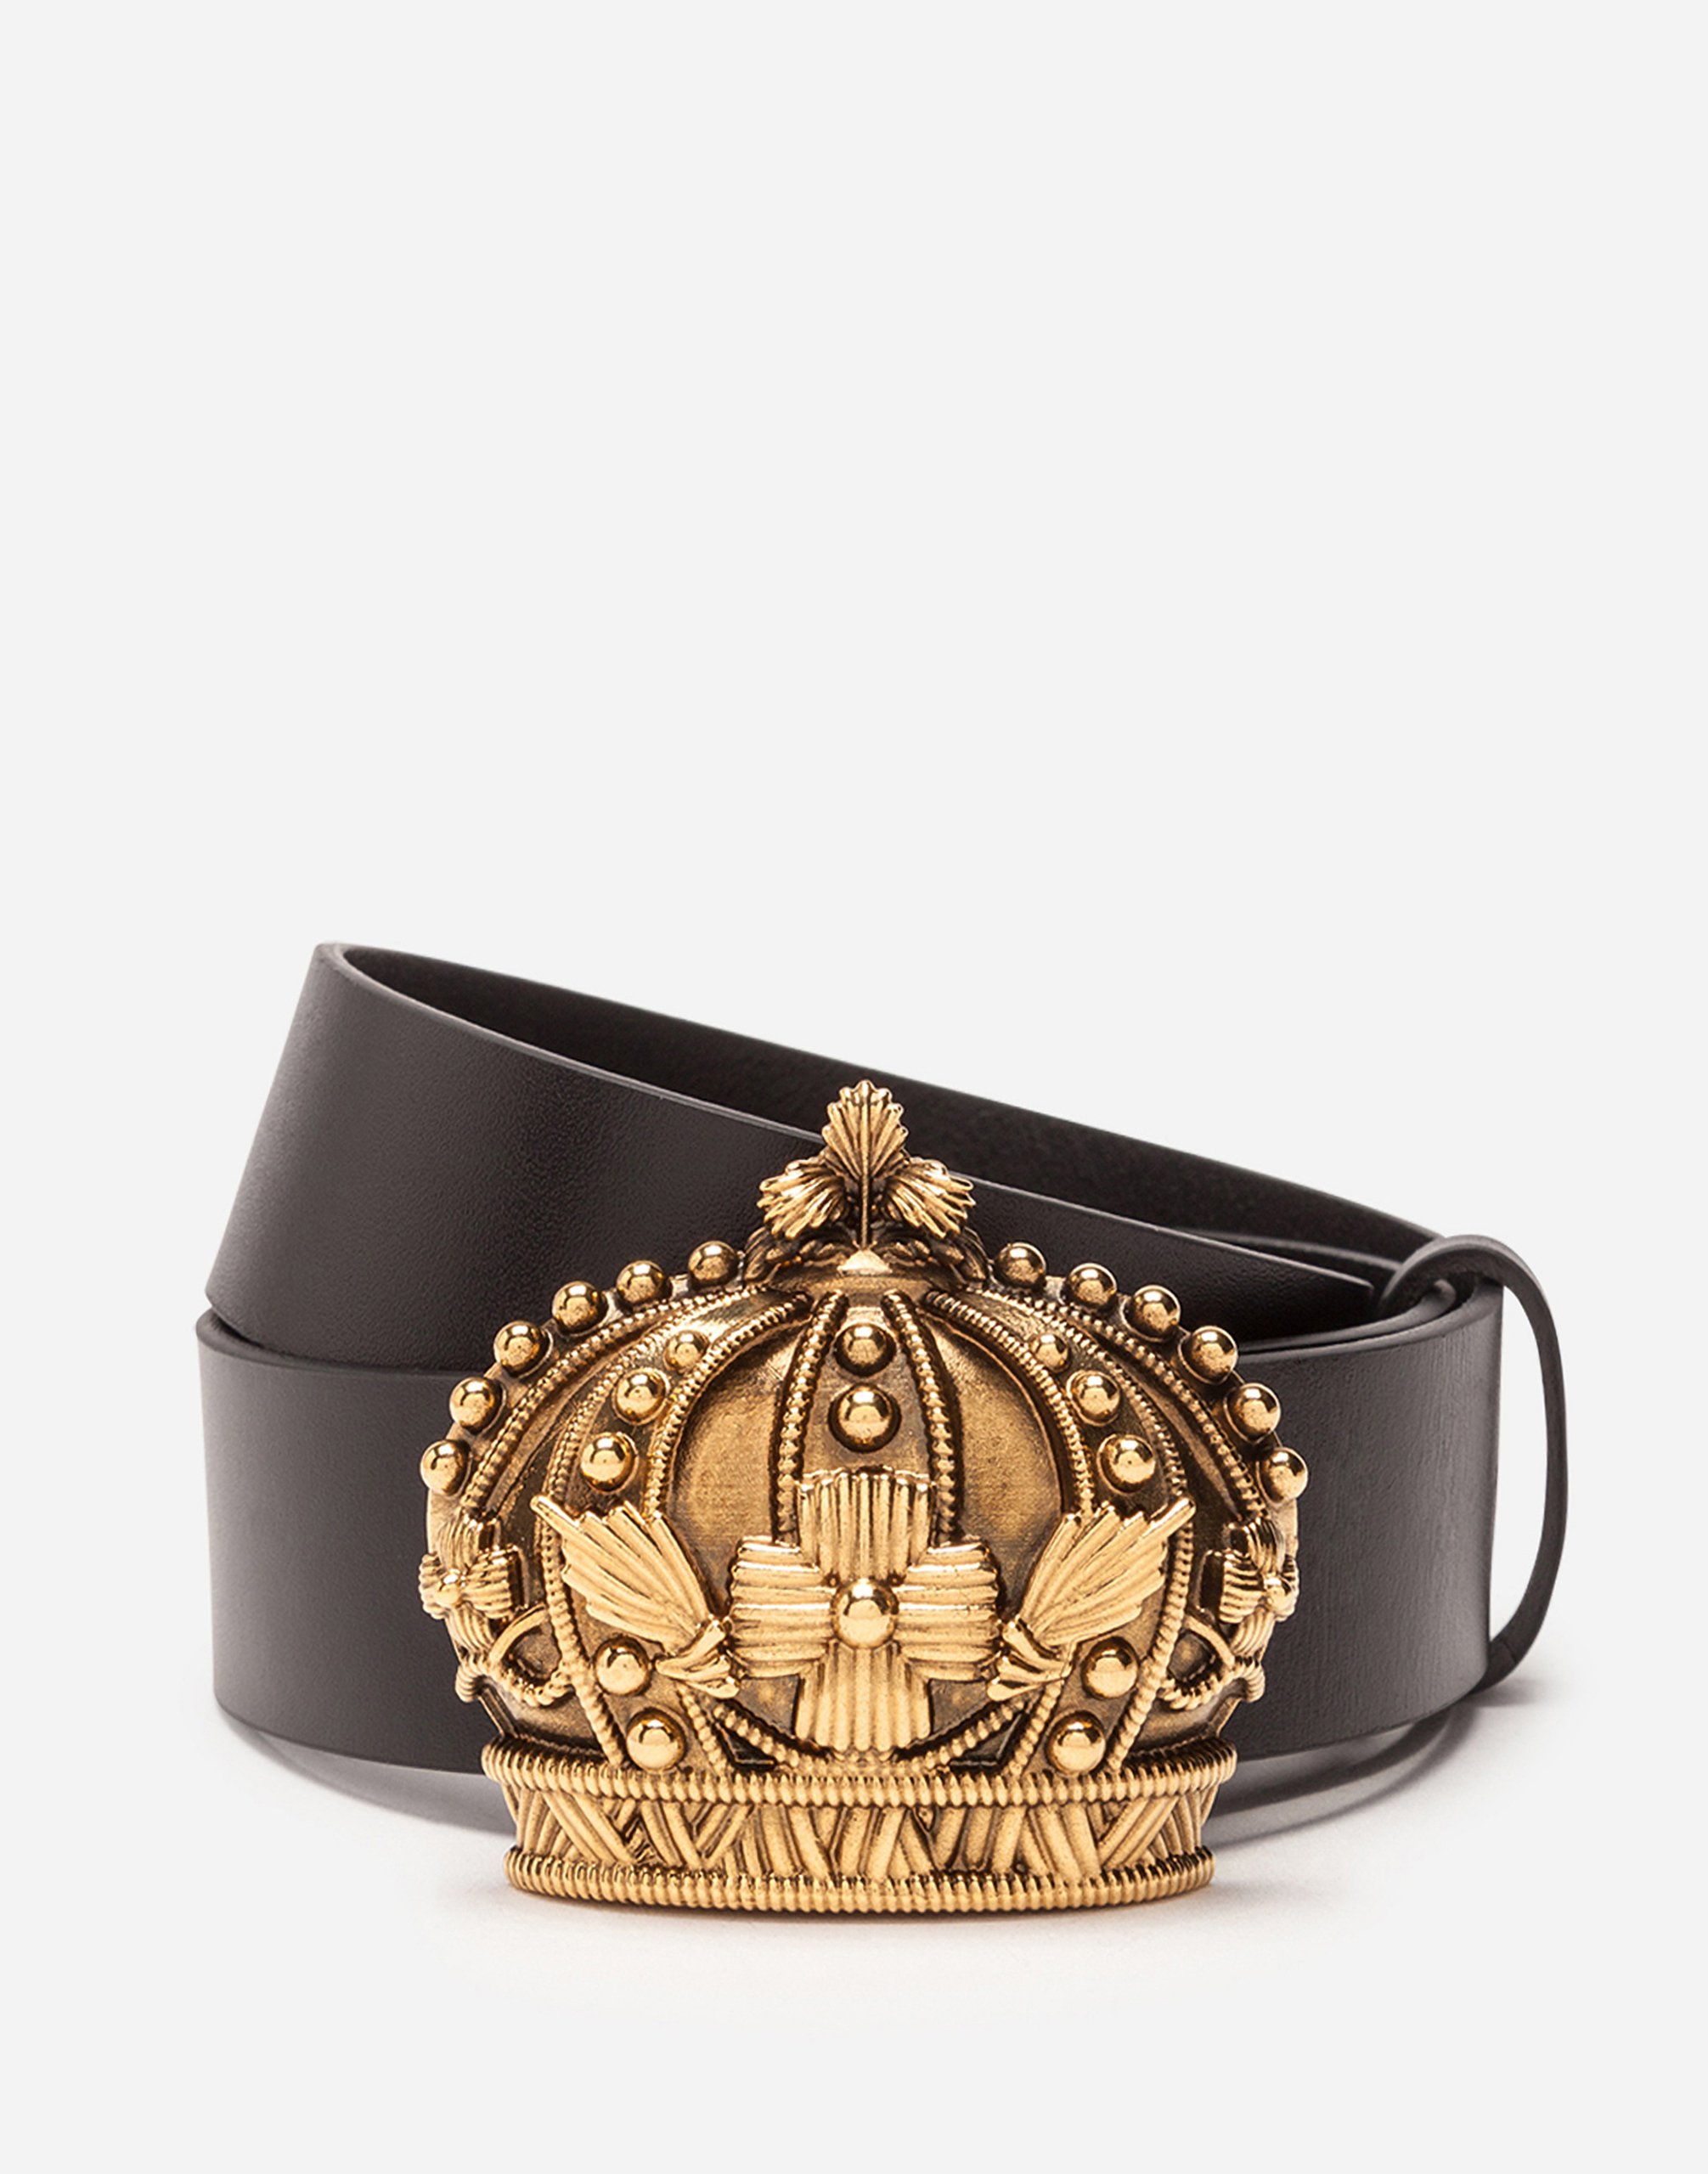 Leather belt with crown buckle